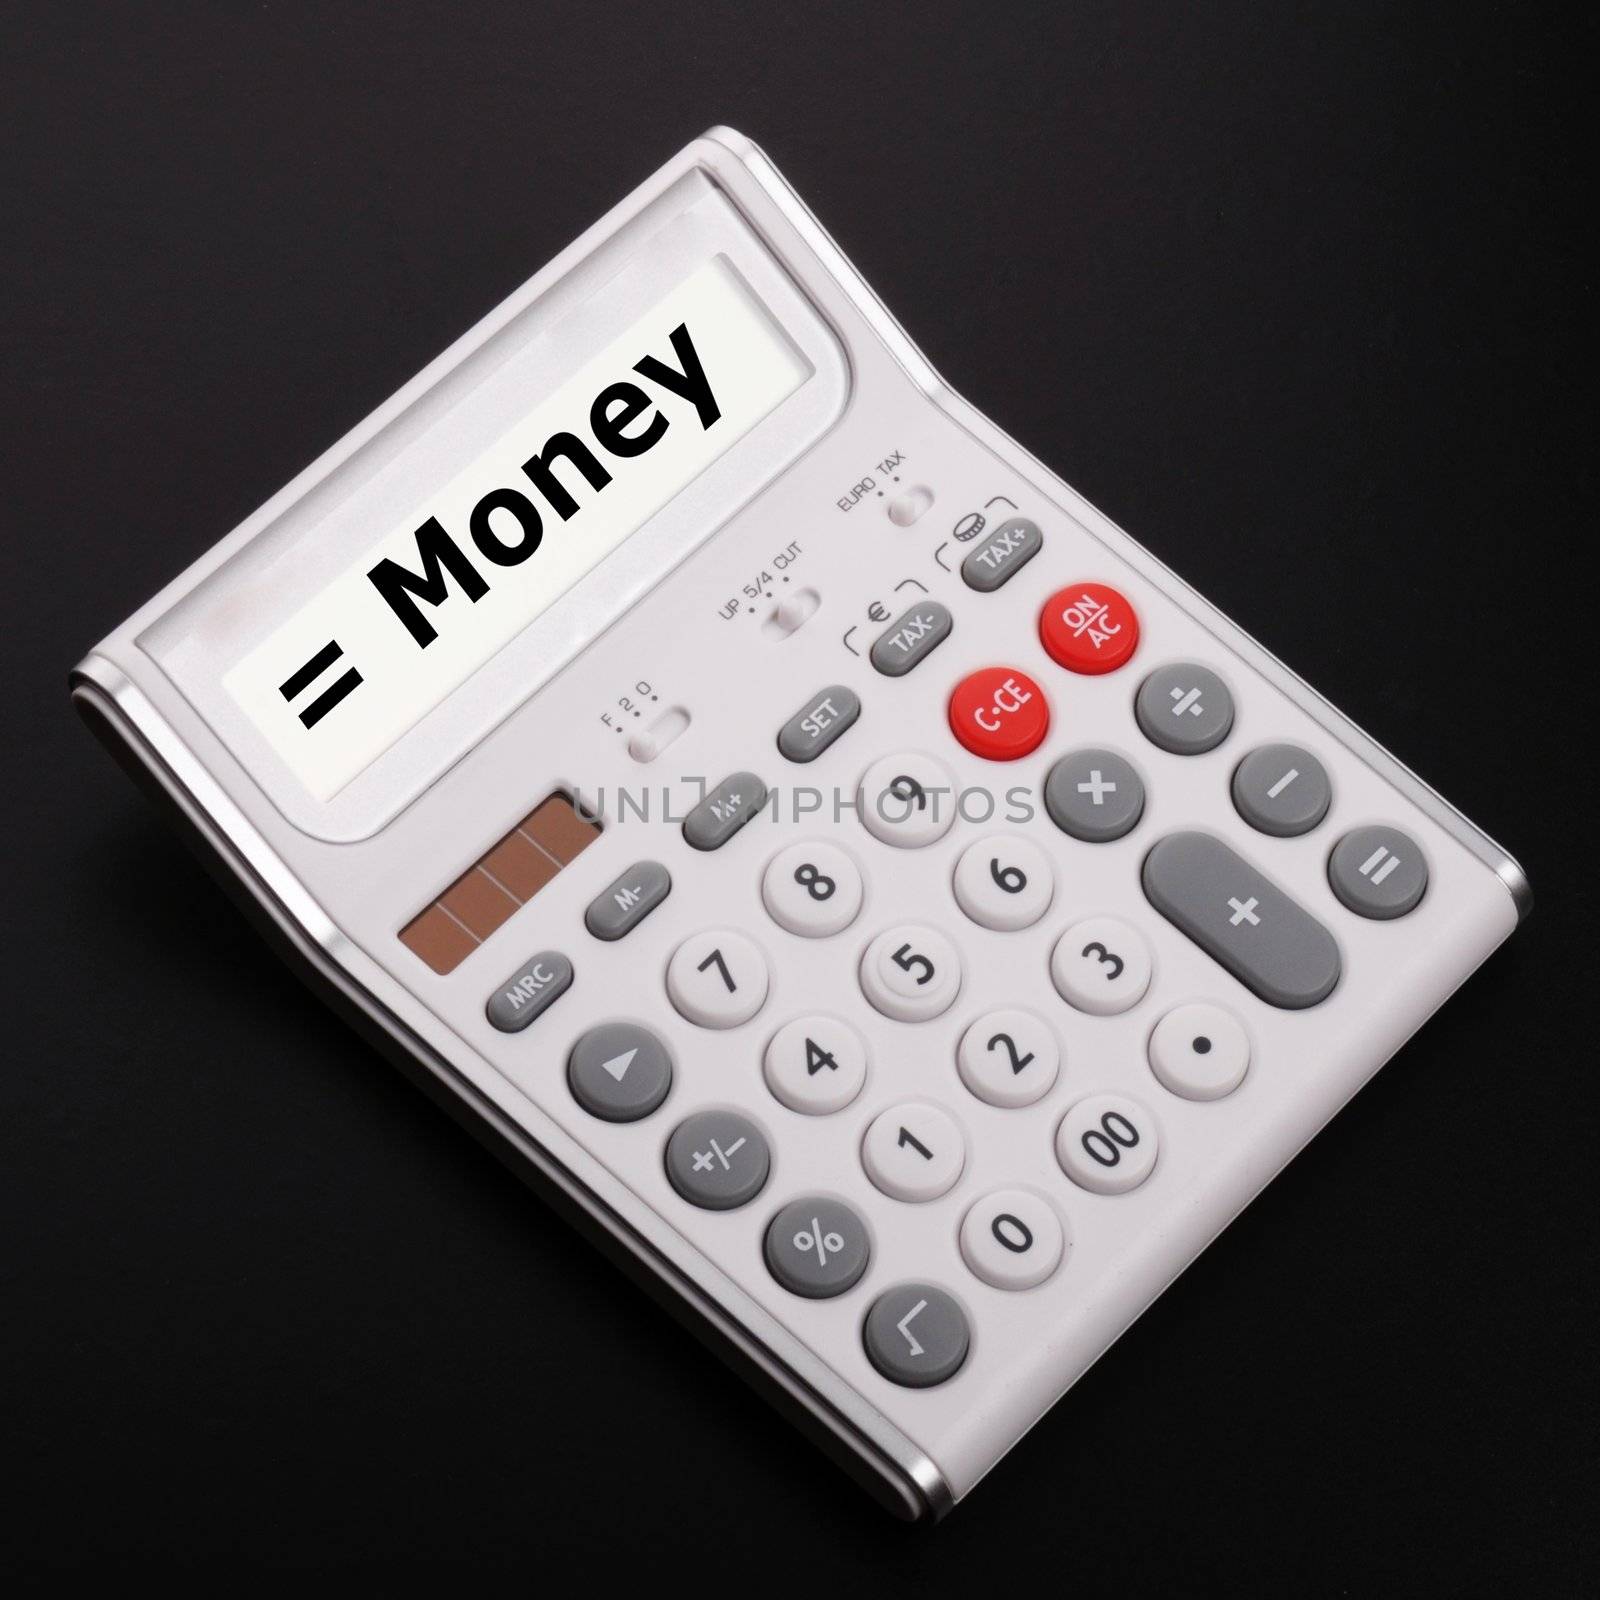 money word on calculator showing financial investment banking or savings concept